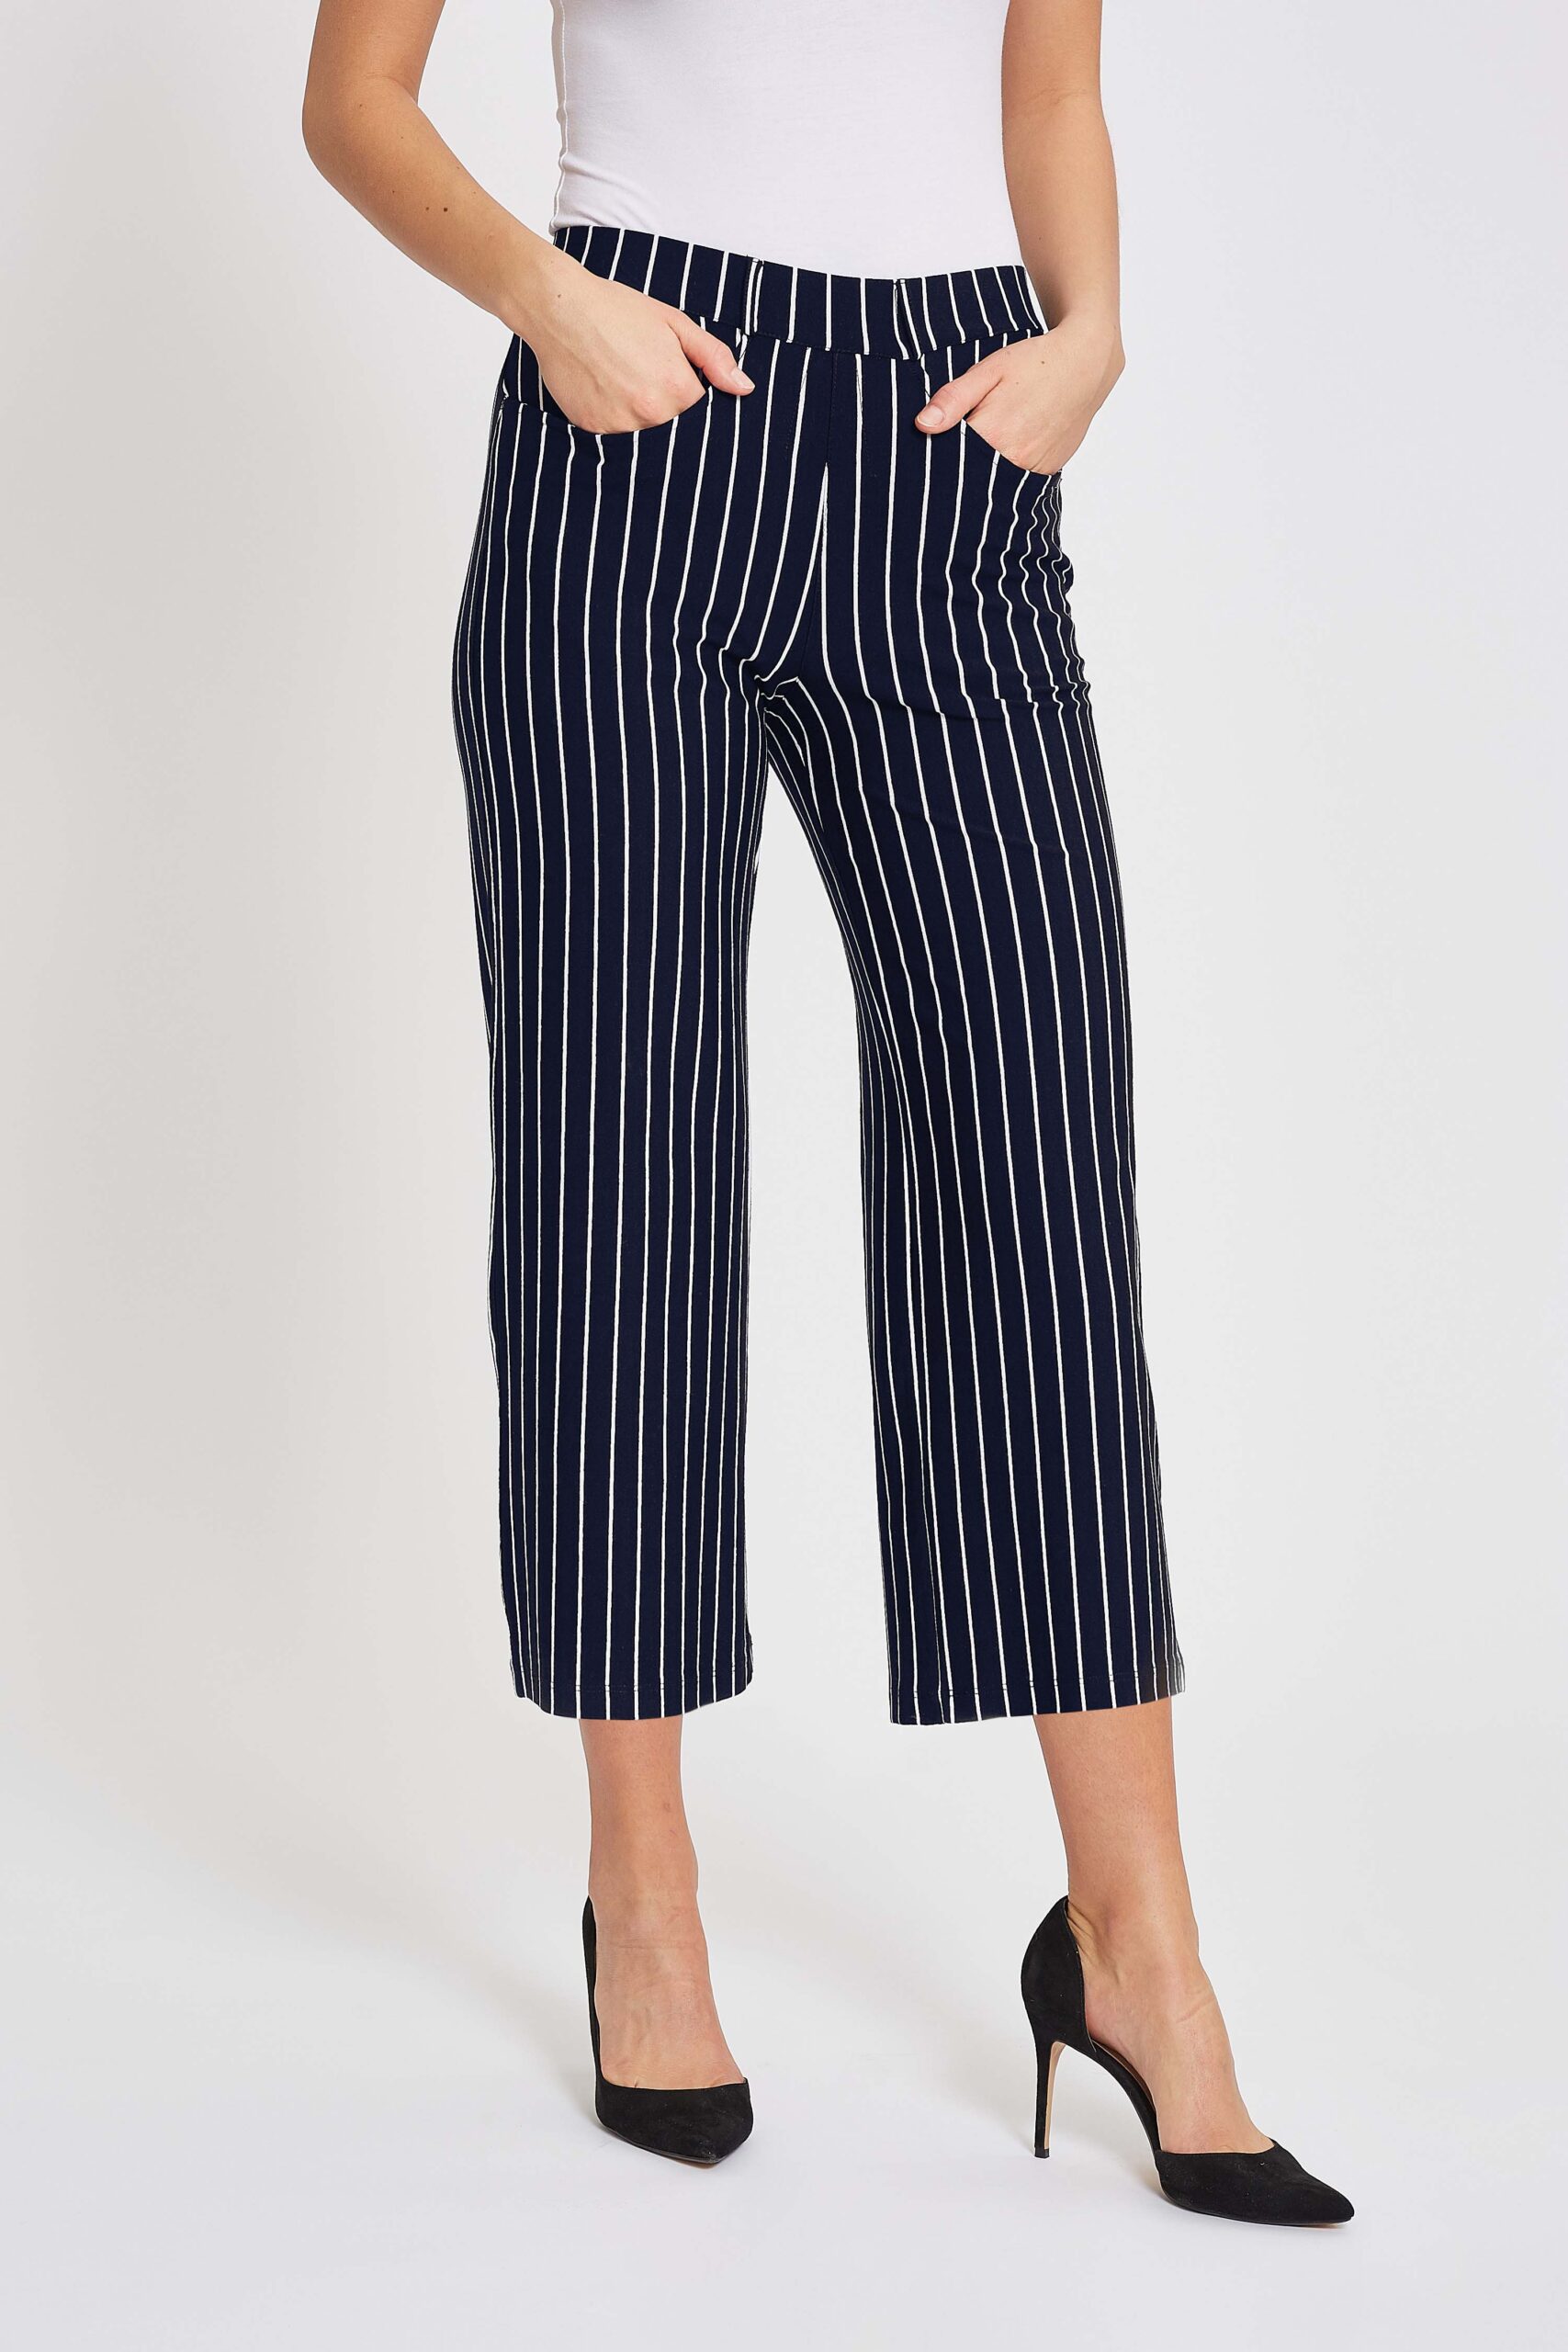 28364 - 49222 Navy Stripe - Donna Laurie